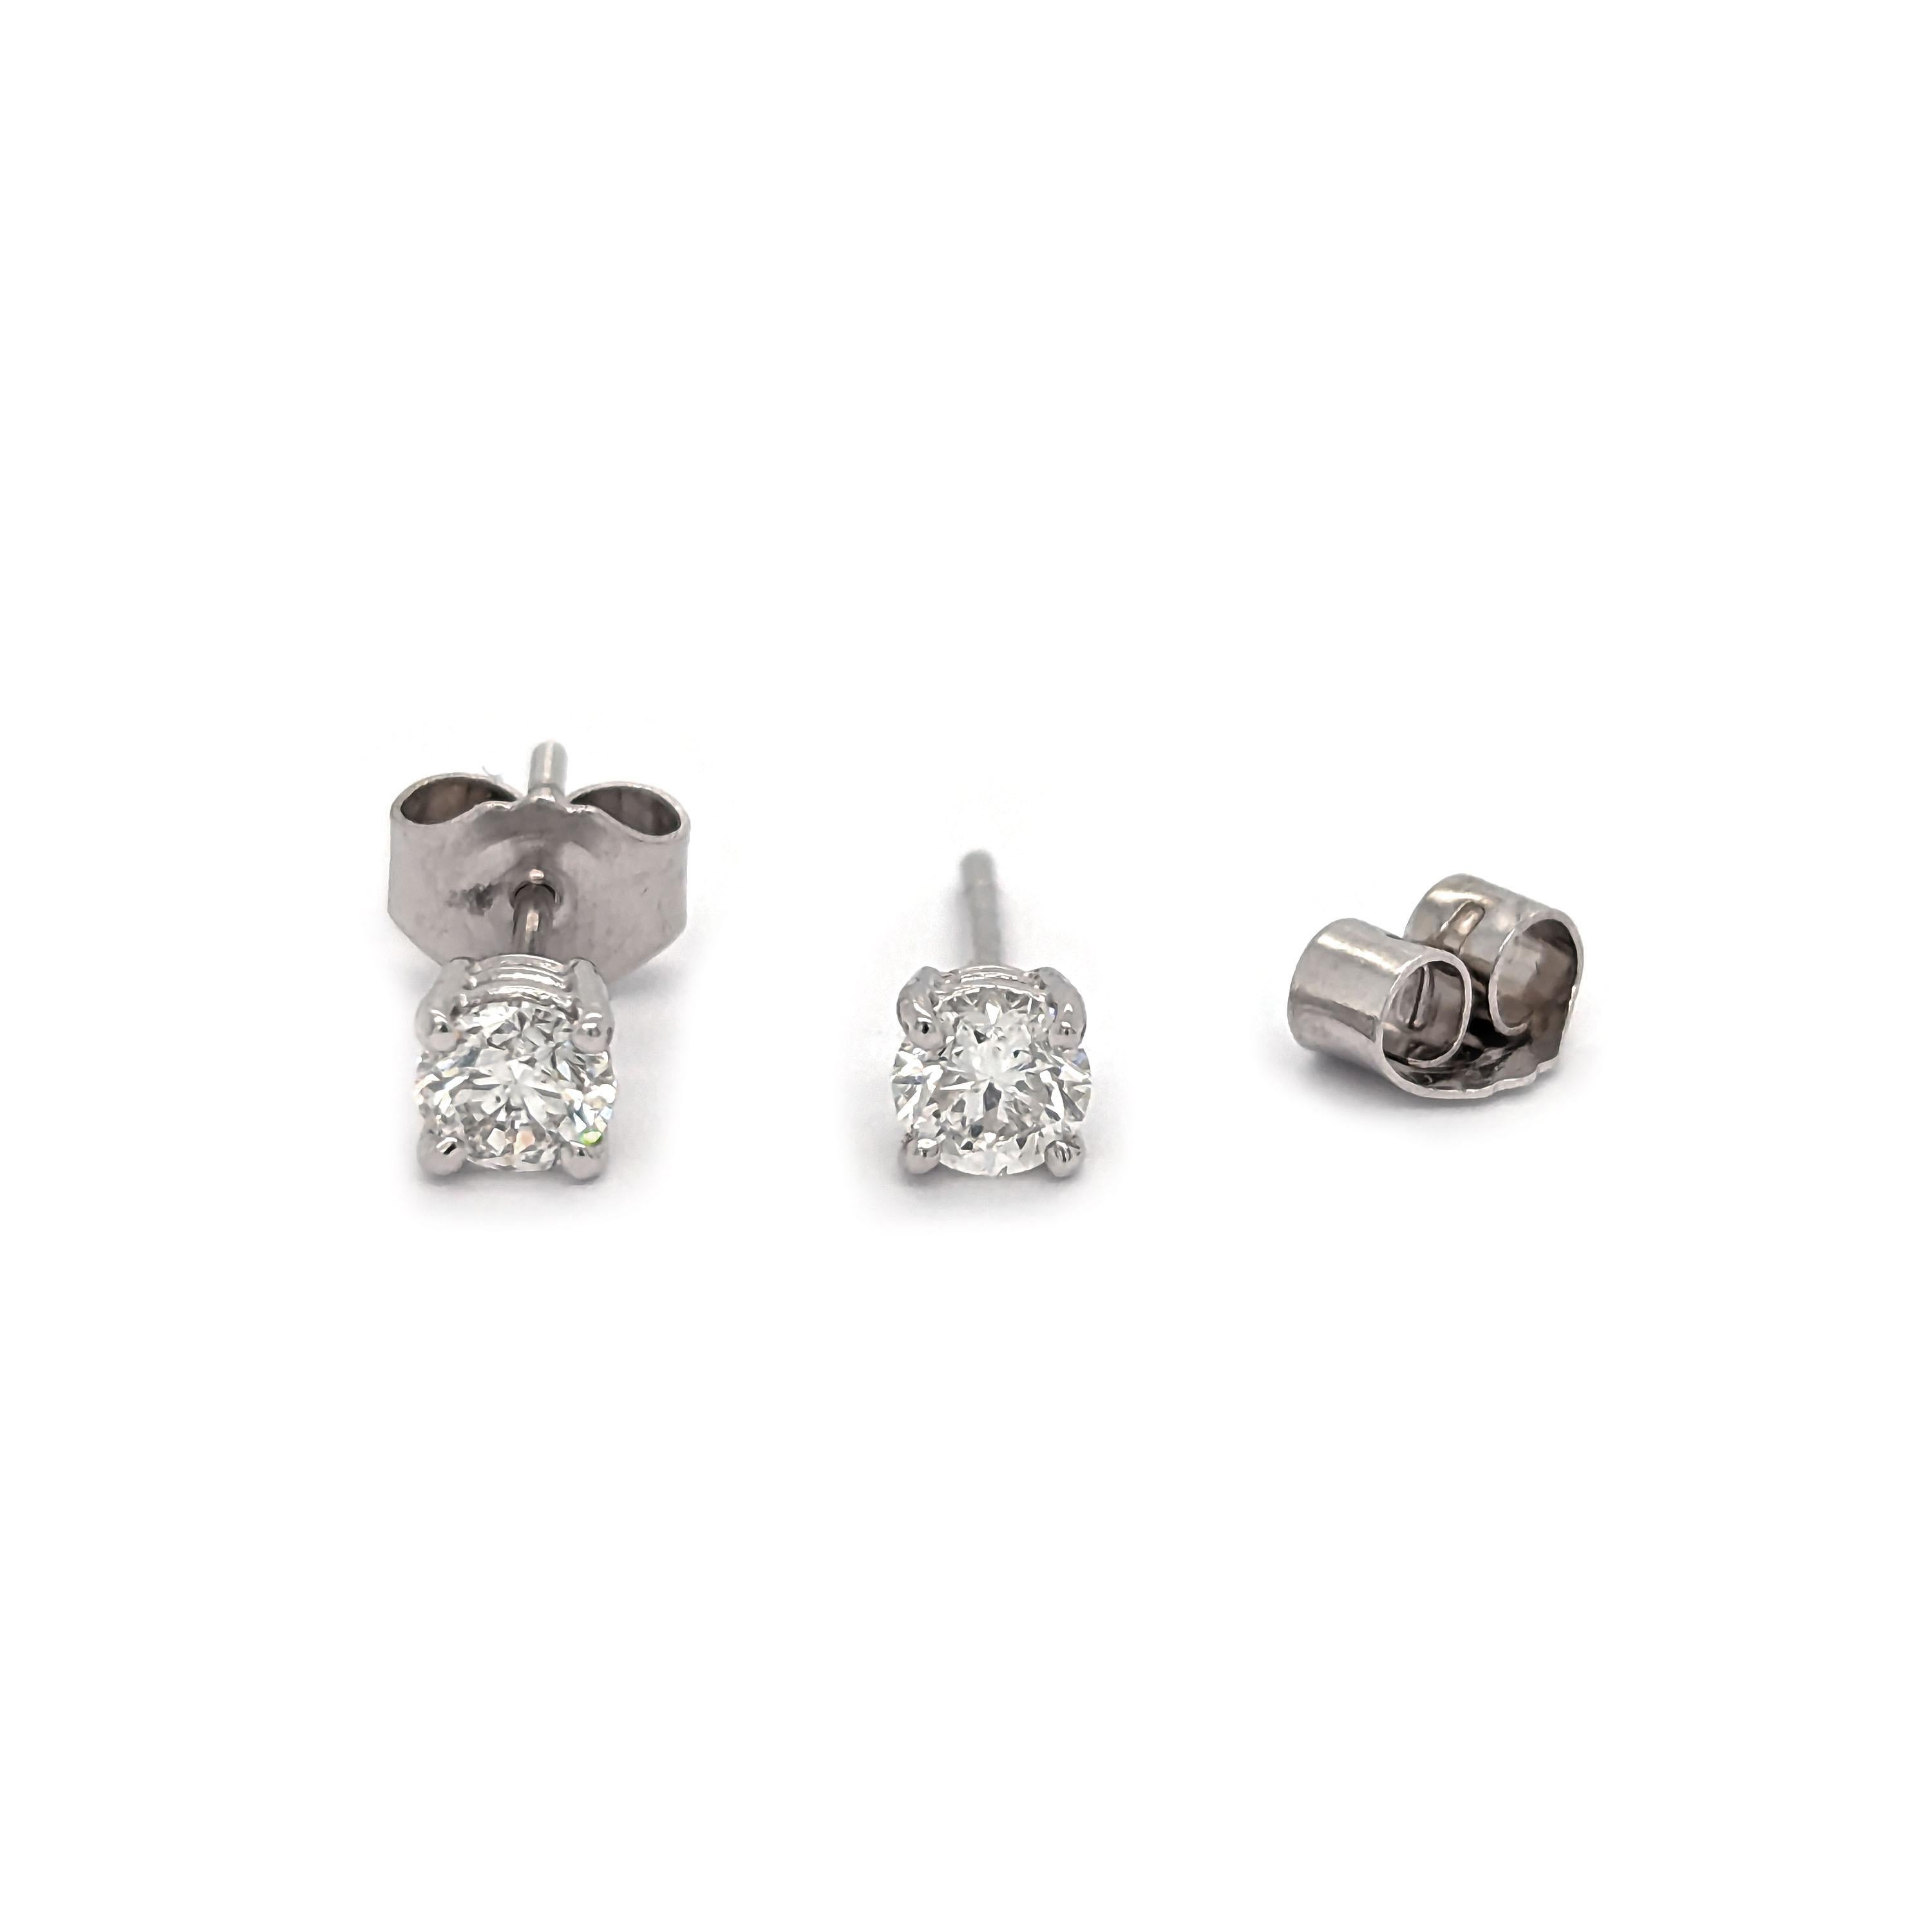 Brilliant Cut Modern Diamond And White Gold Stud Earrings, 0.52 Carats For Sale